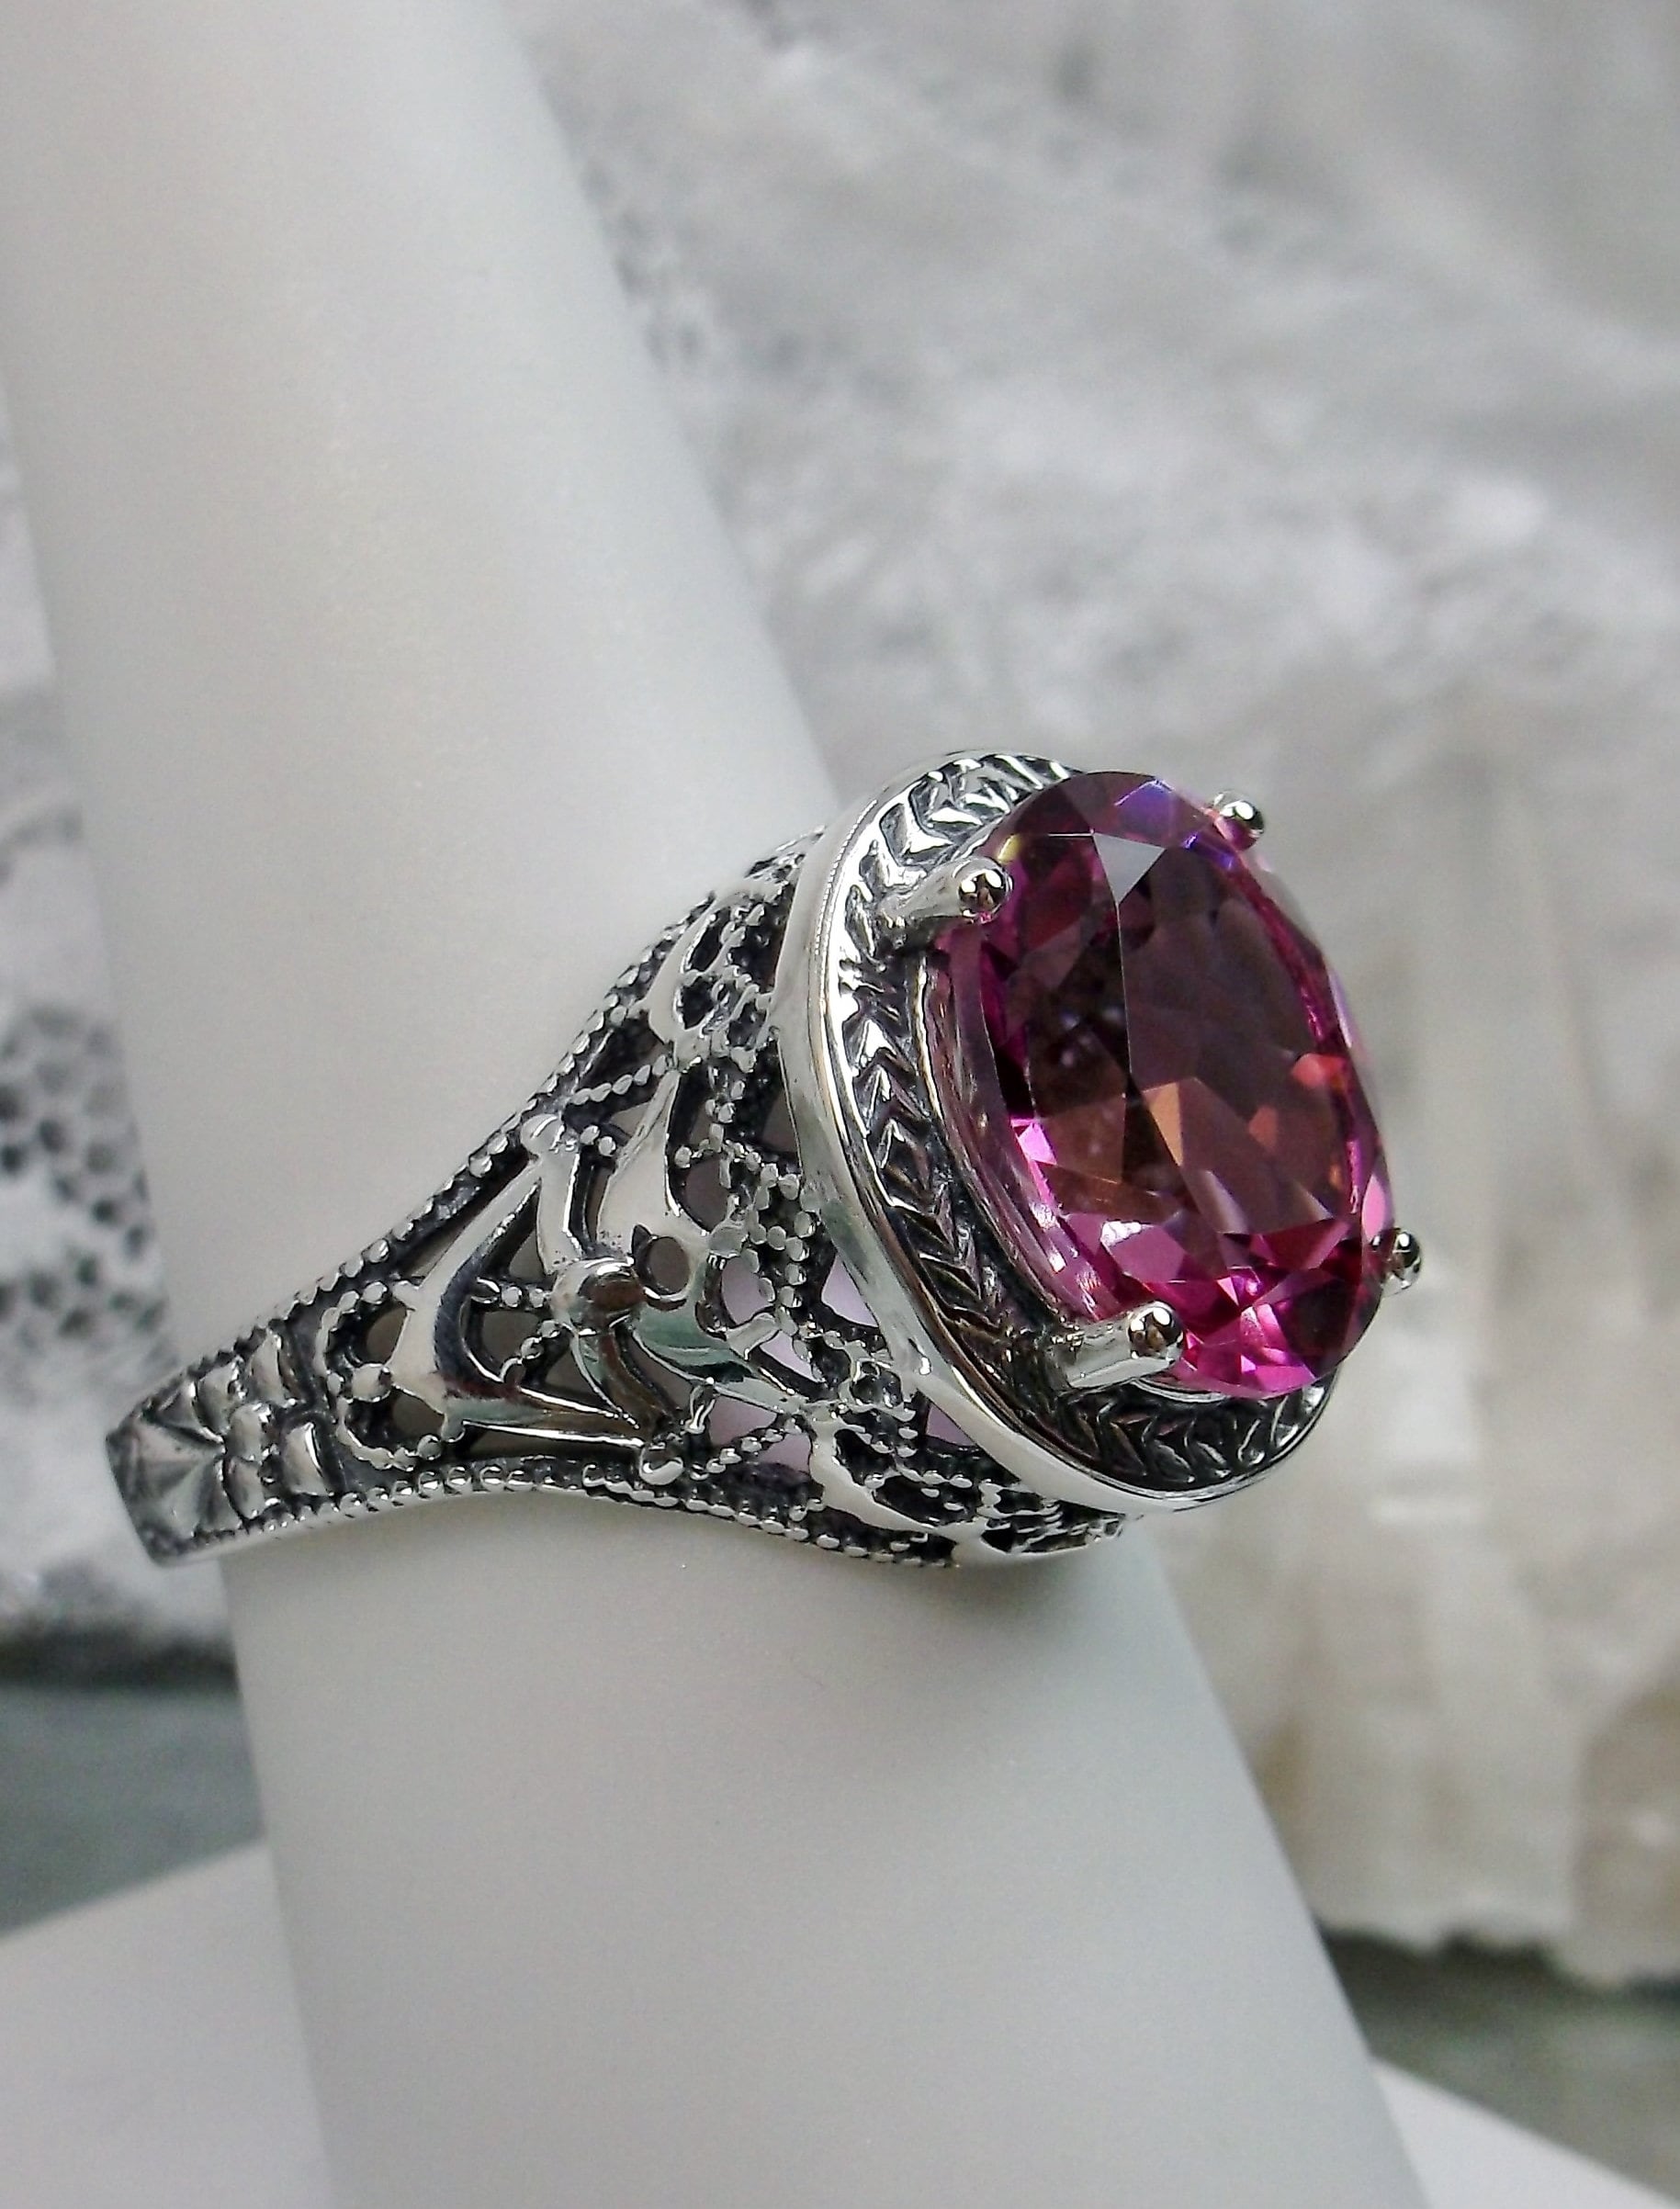 Flower Shaped Handmade Jewelry Natural Pink Topaz Gemstone Silver Ring Size 7 8 8